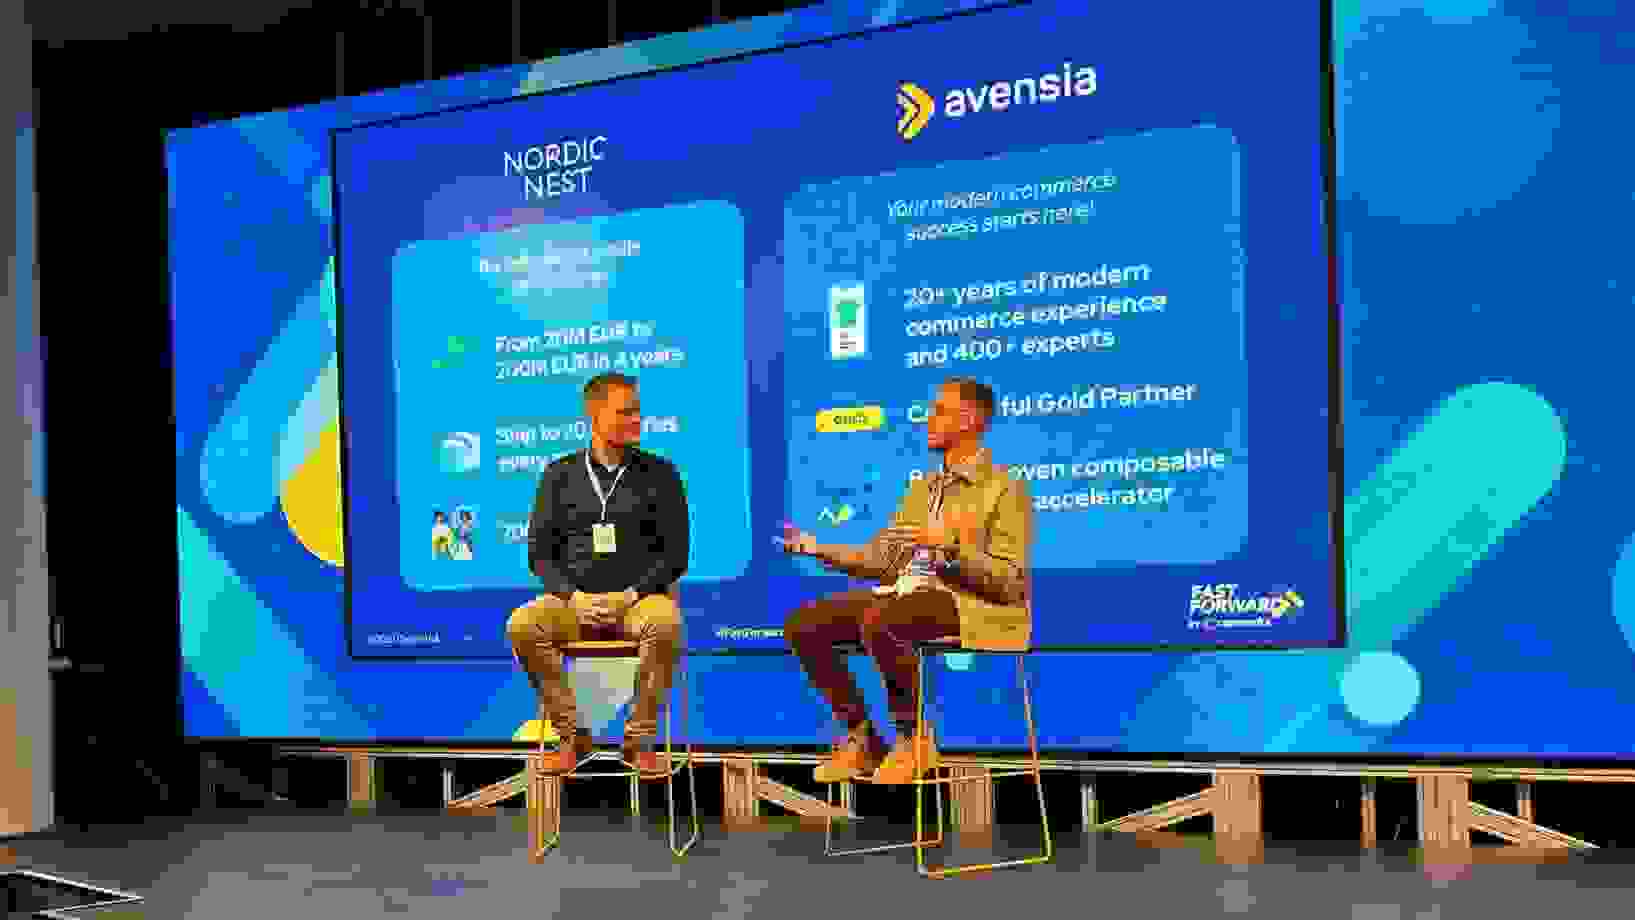 Customer spotlight with Nordic Nest and Avensia